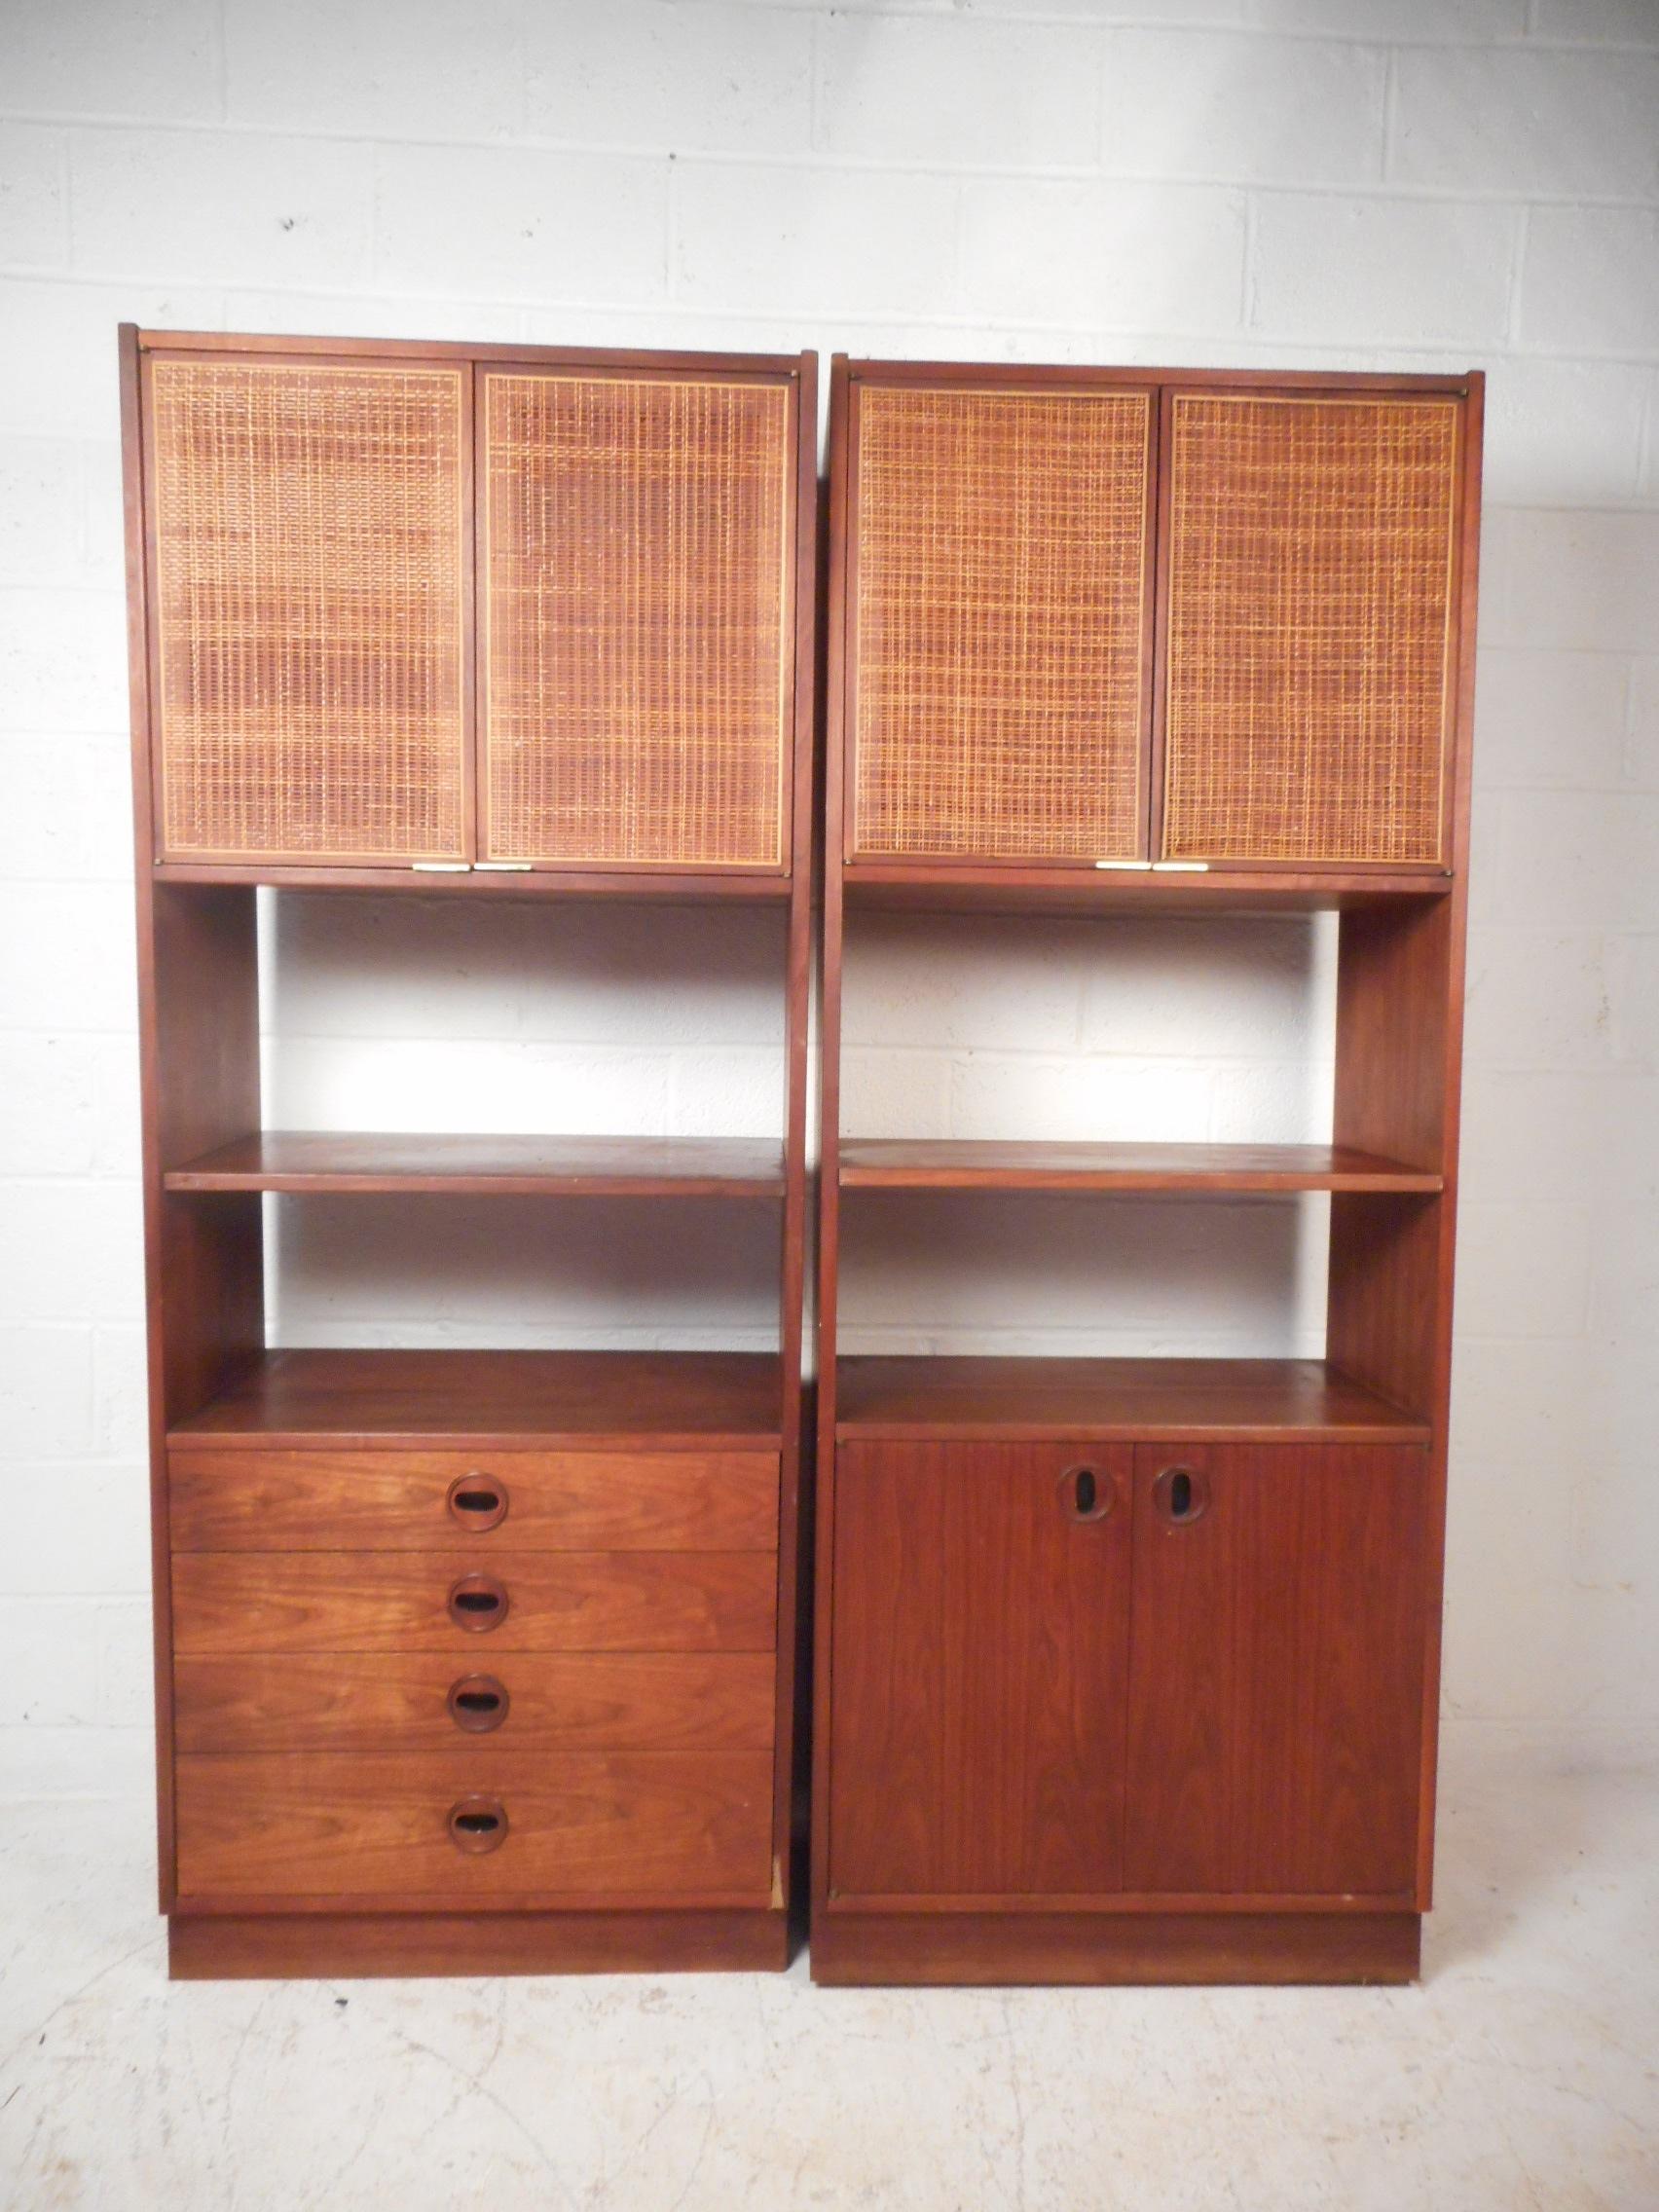 This stunning pair of vintage modern free standing wall units feature plenty of room for storage within its numerous drawers and compartments. A versatile design that makes the perfect display case or storage piece. Wonderful cane front cabinets